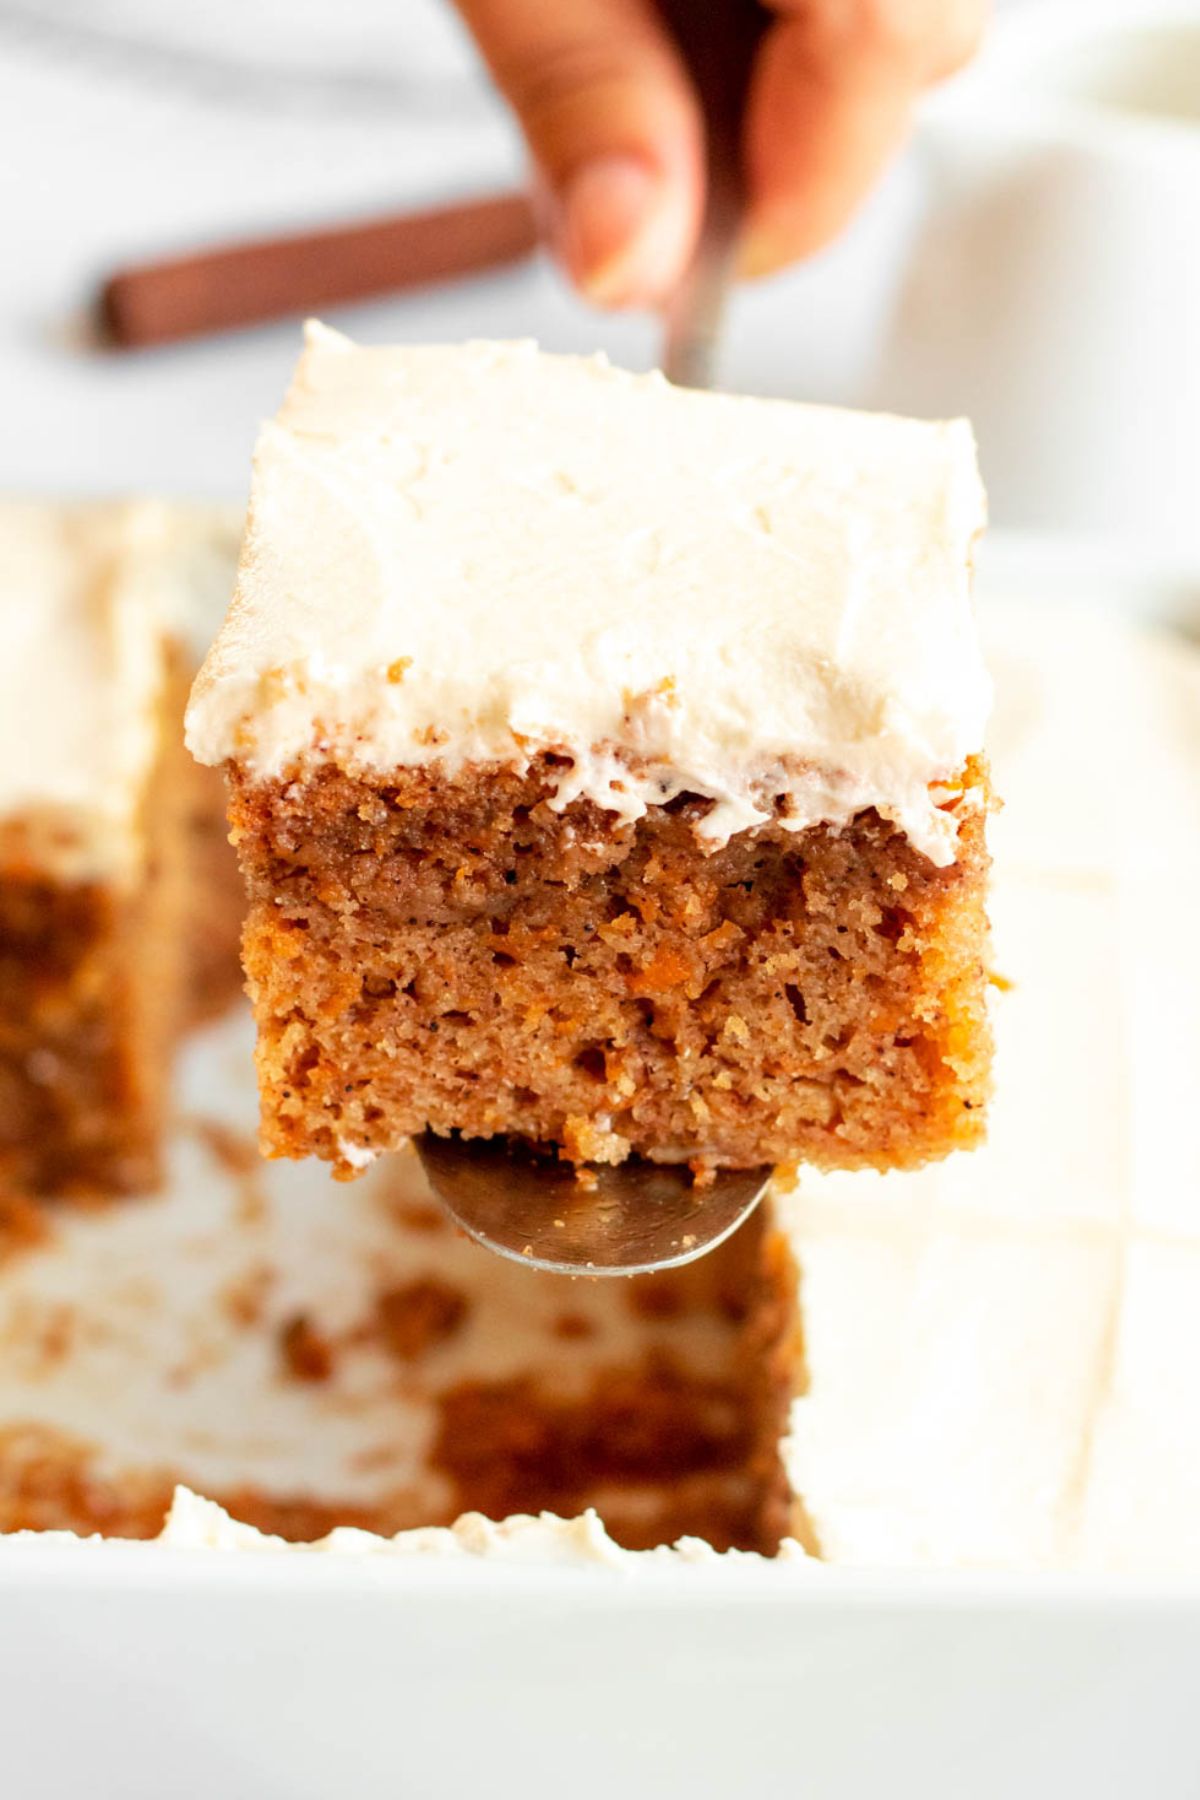 Slice of pumpkin cake with cream cheese frosting lifted from the pan.